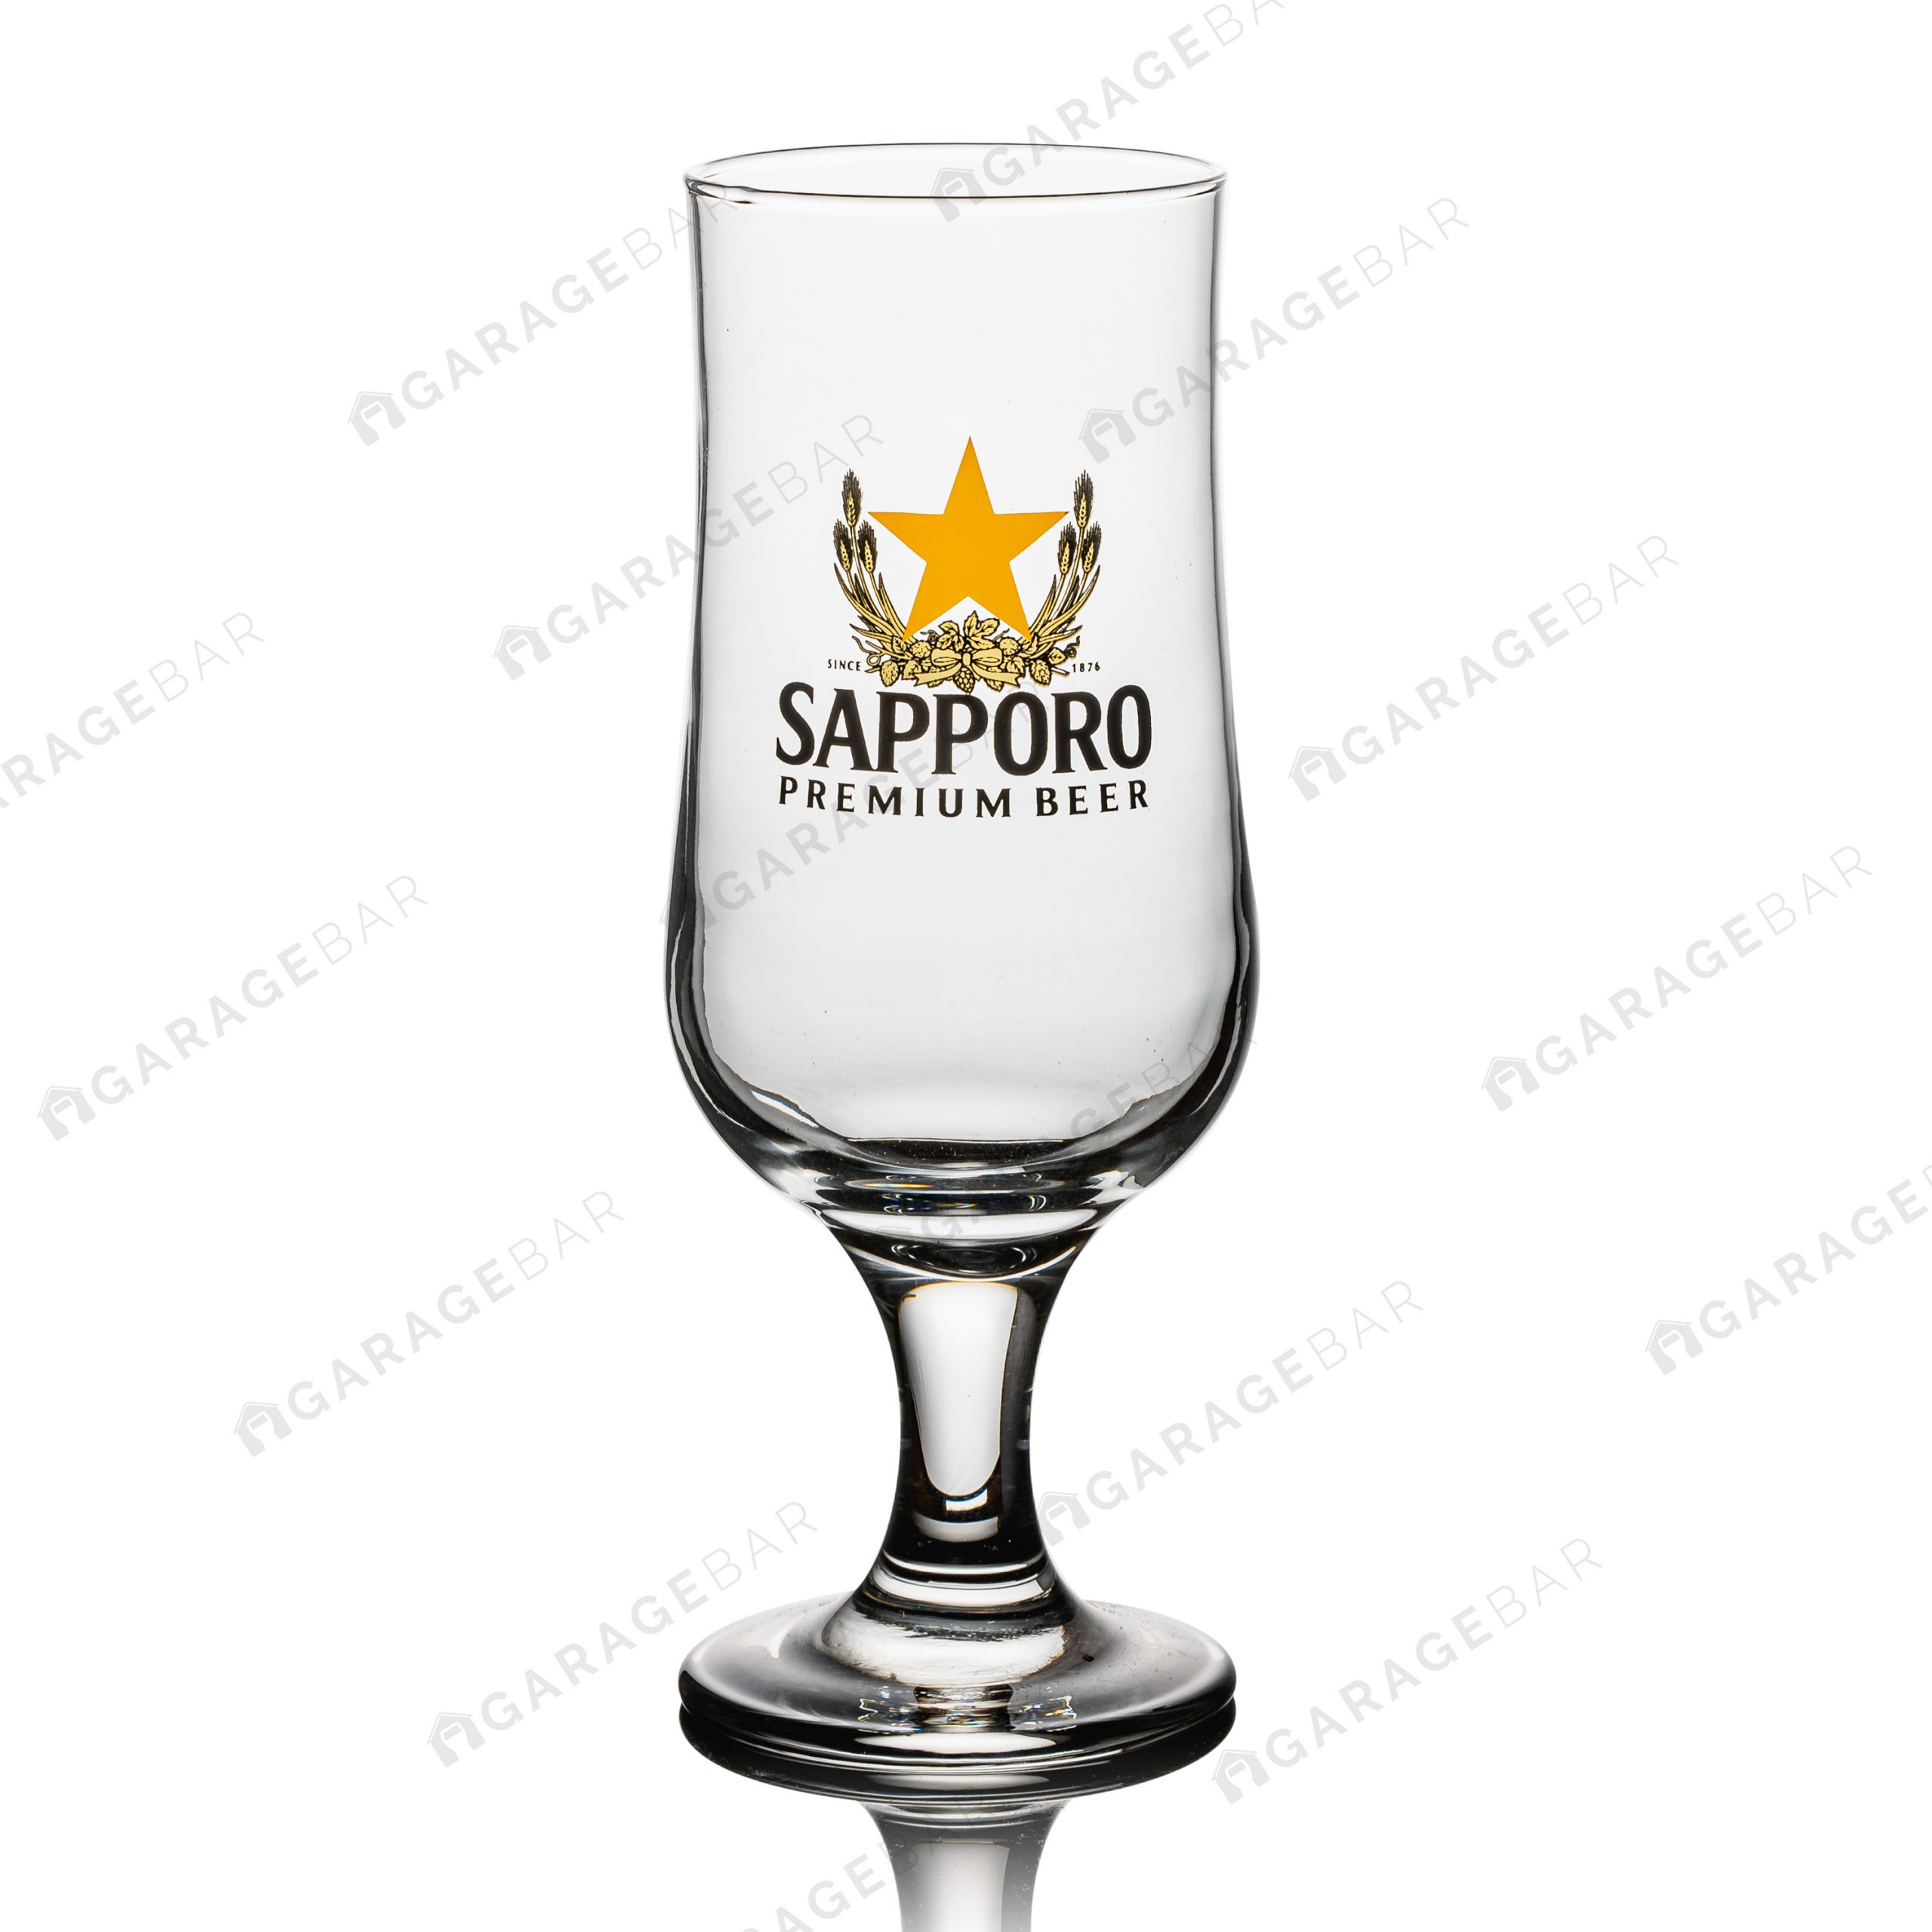 Sapporo Beer Glass